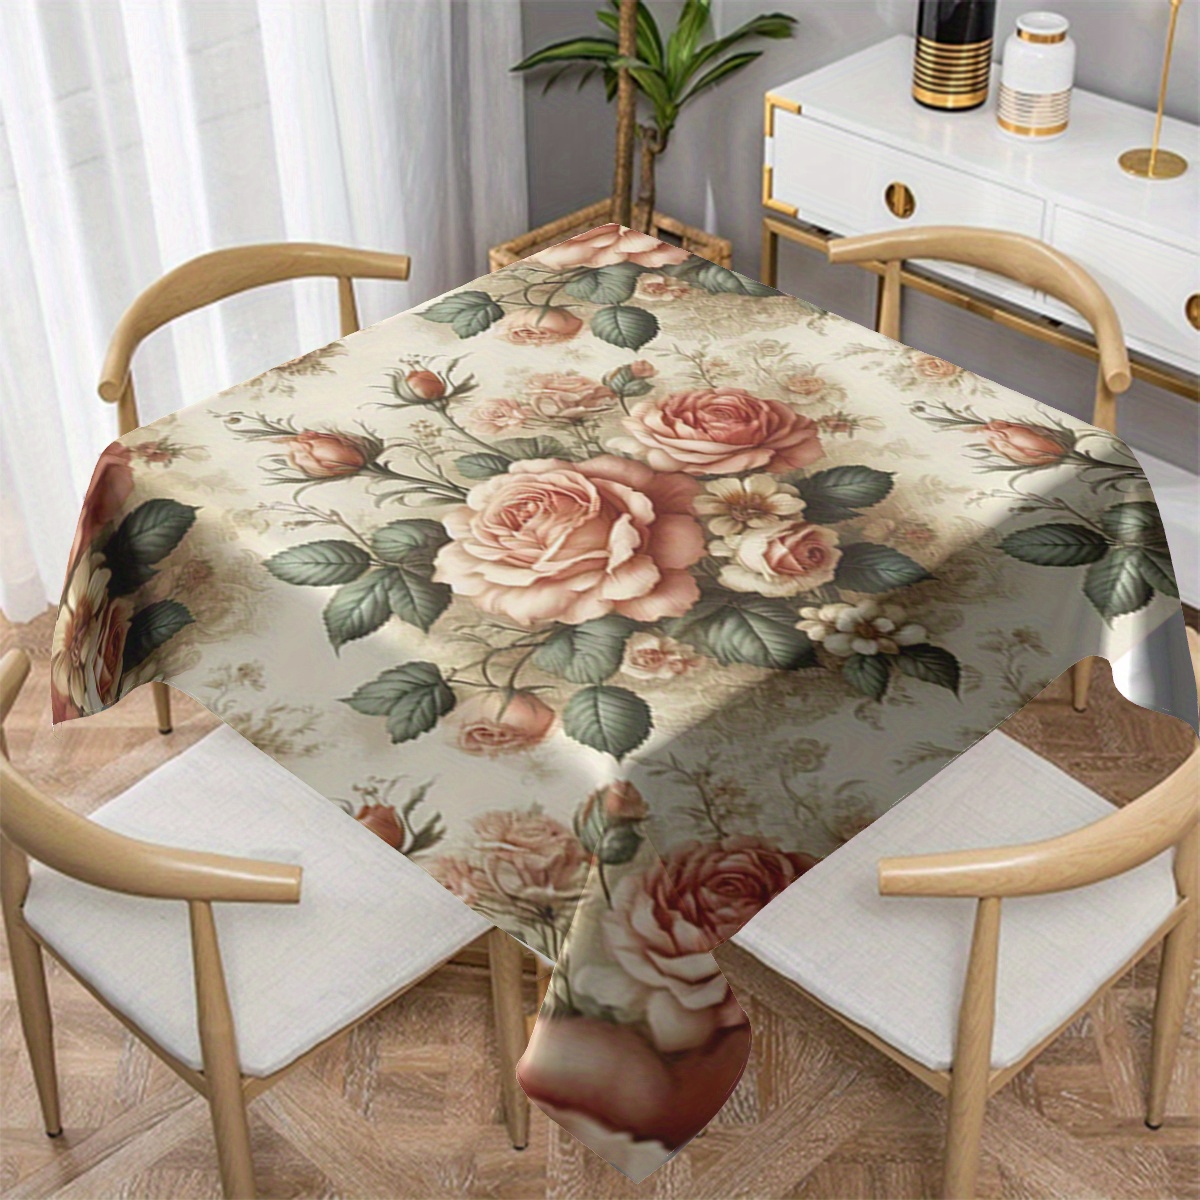 

Versatile Waterproof & Stain-resistant Tablecloth For Kitchen, Dining Room, And Outdoor Parties - Square/round Polyester Design Tablecloths Waterproof Tablecloth